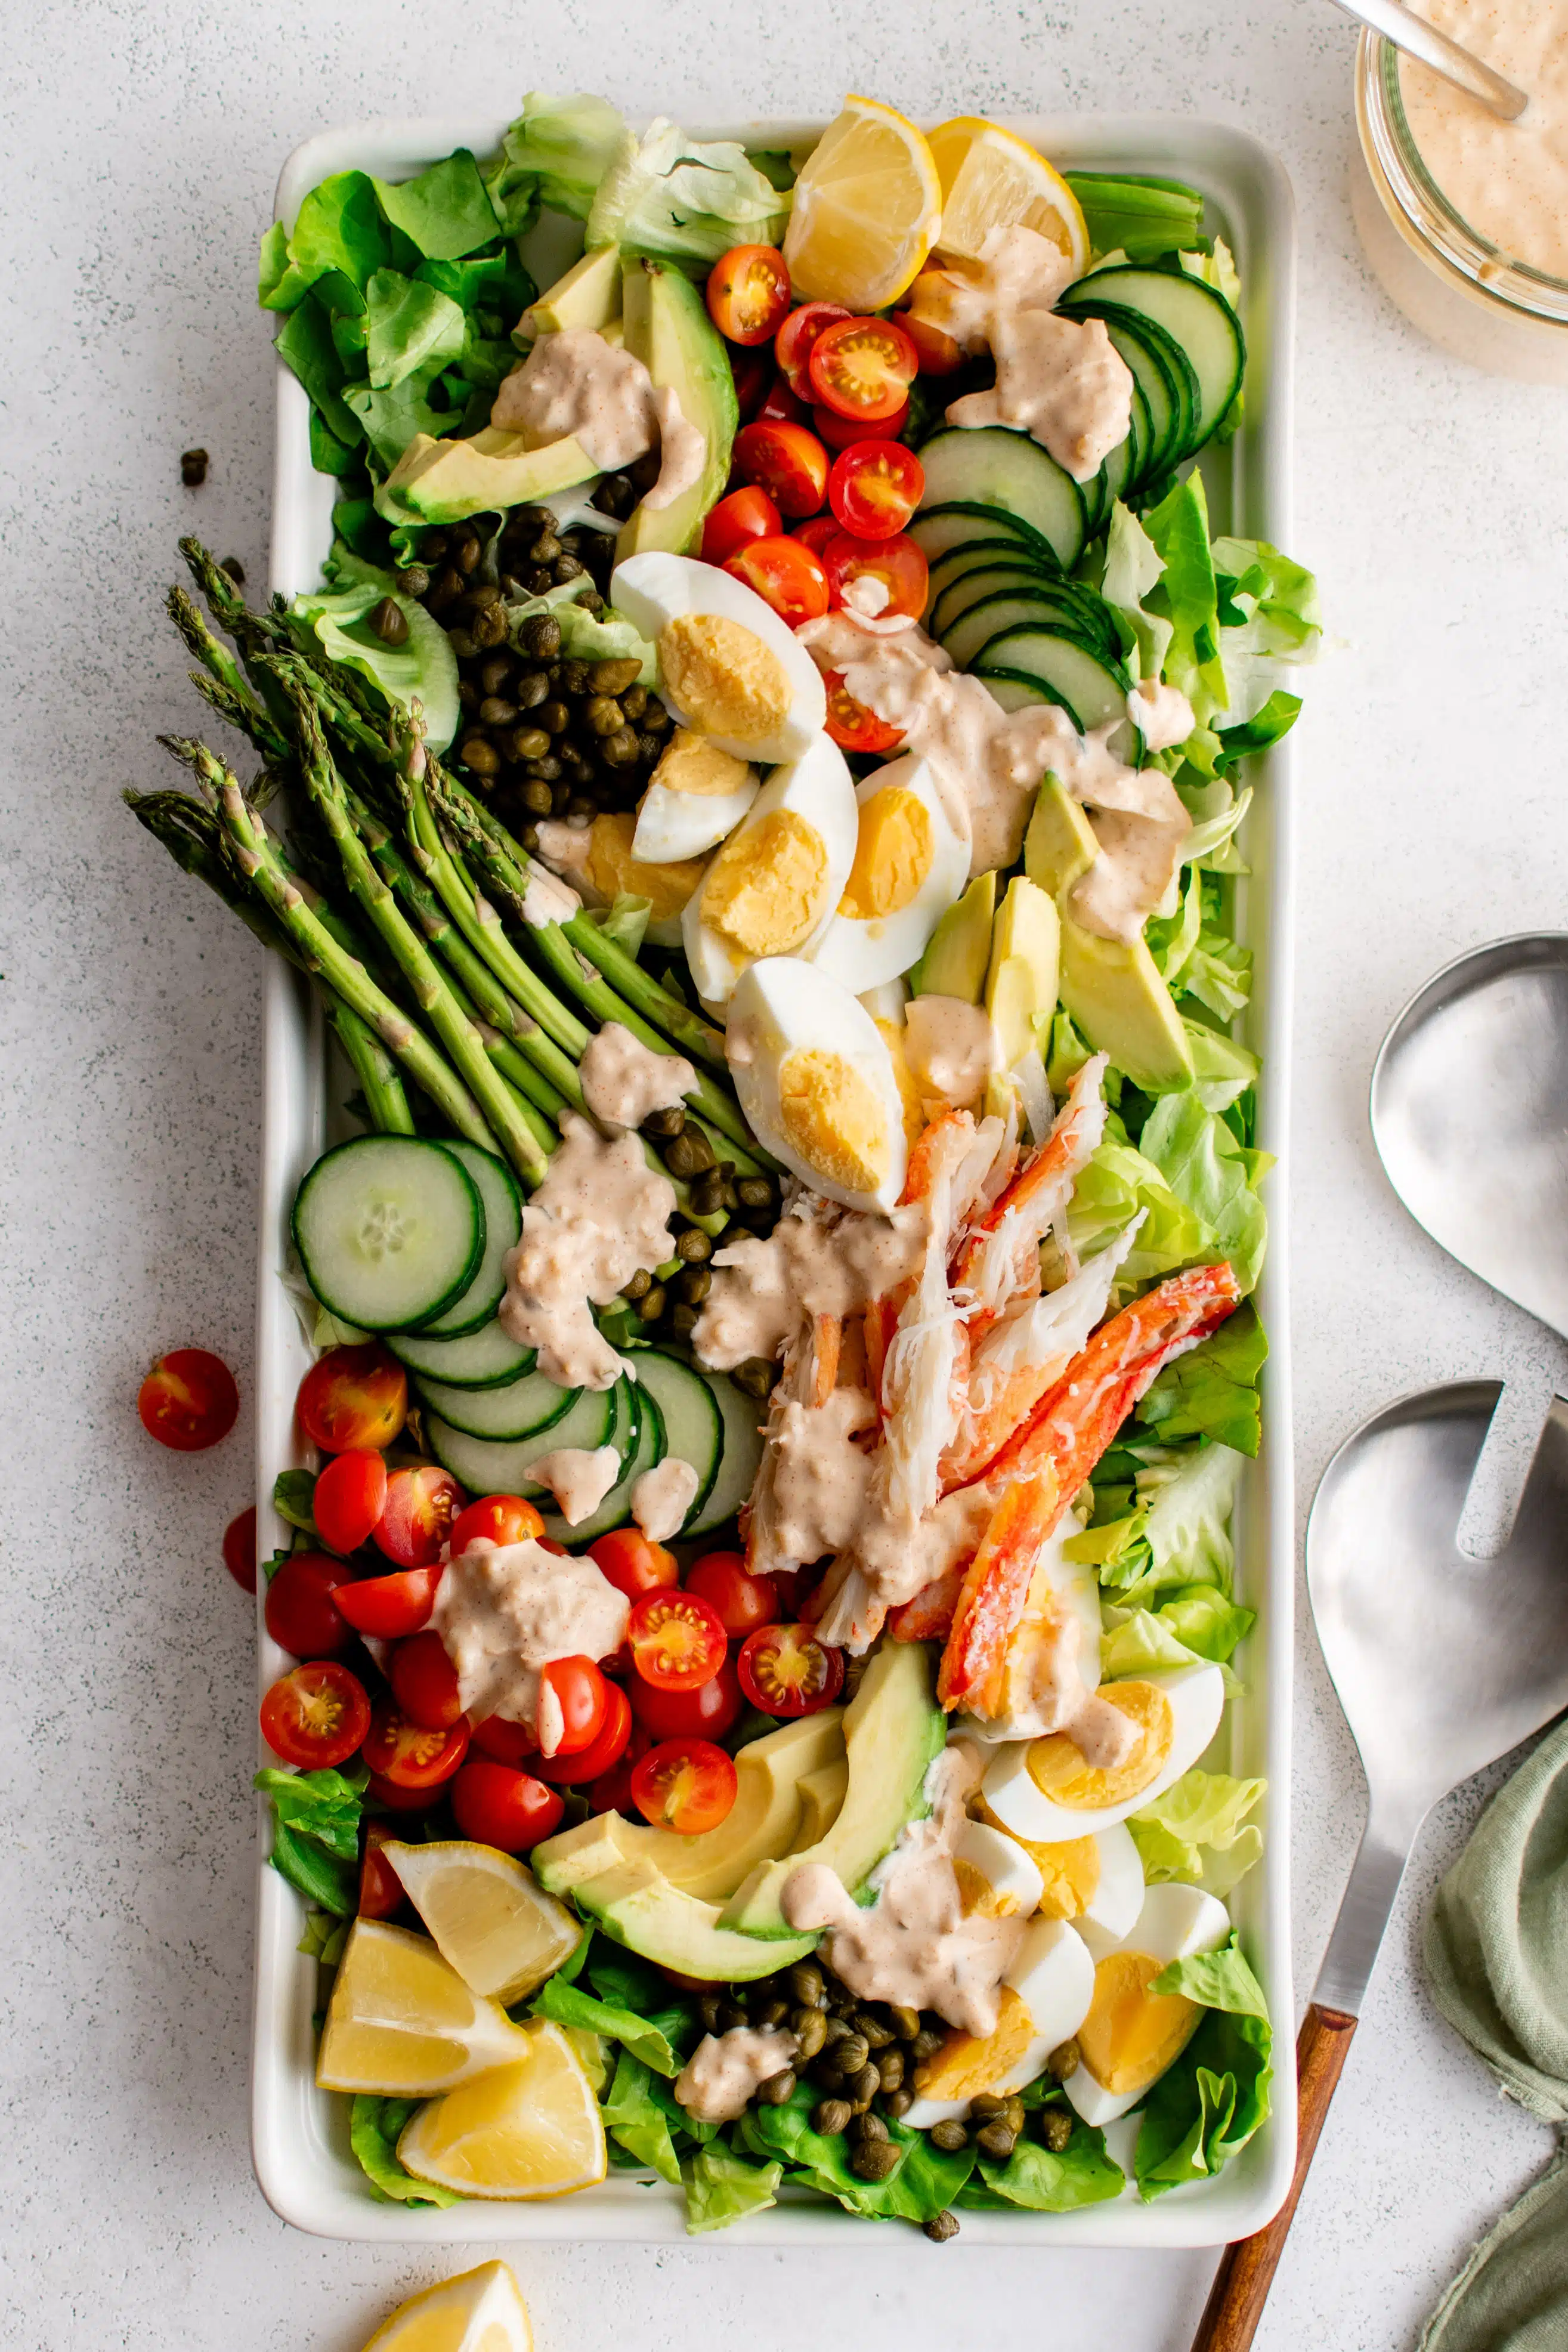 Large white rectangle salad platter plated beautifully with crab Louie salad made with a bed of butter lettuce topped with cherry tomatoes, hard-boiled eggs, avocado, sliced cucumbers, lemon slices, asparagus, lump crab meat and drizzled with homemade dressing.